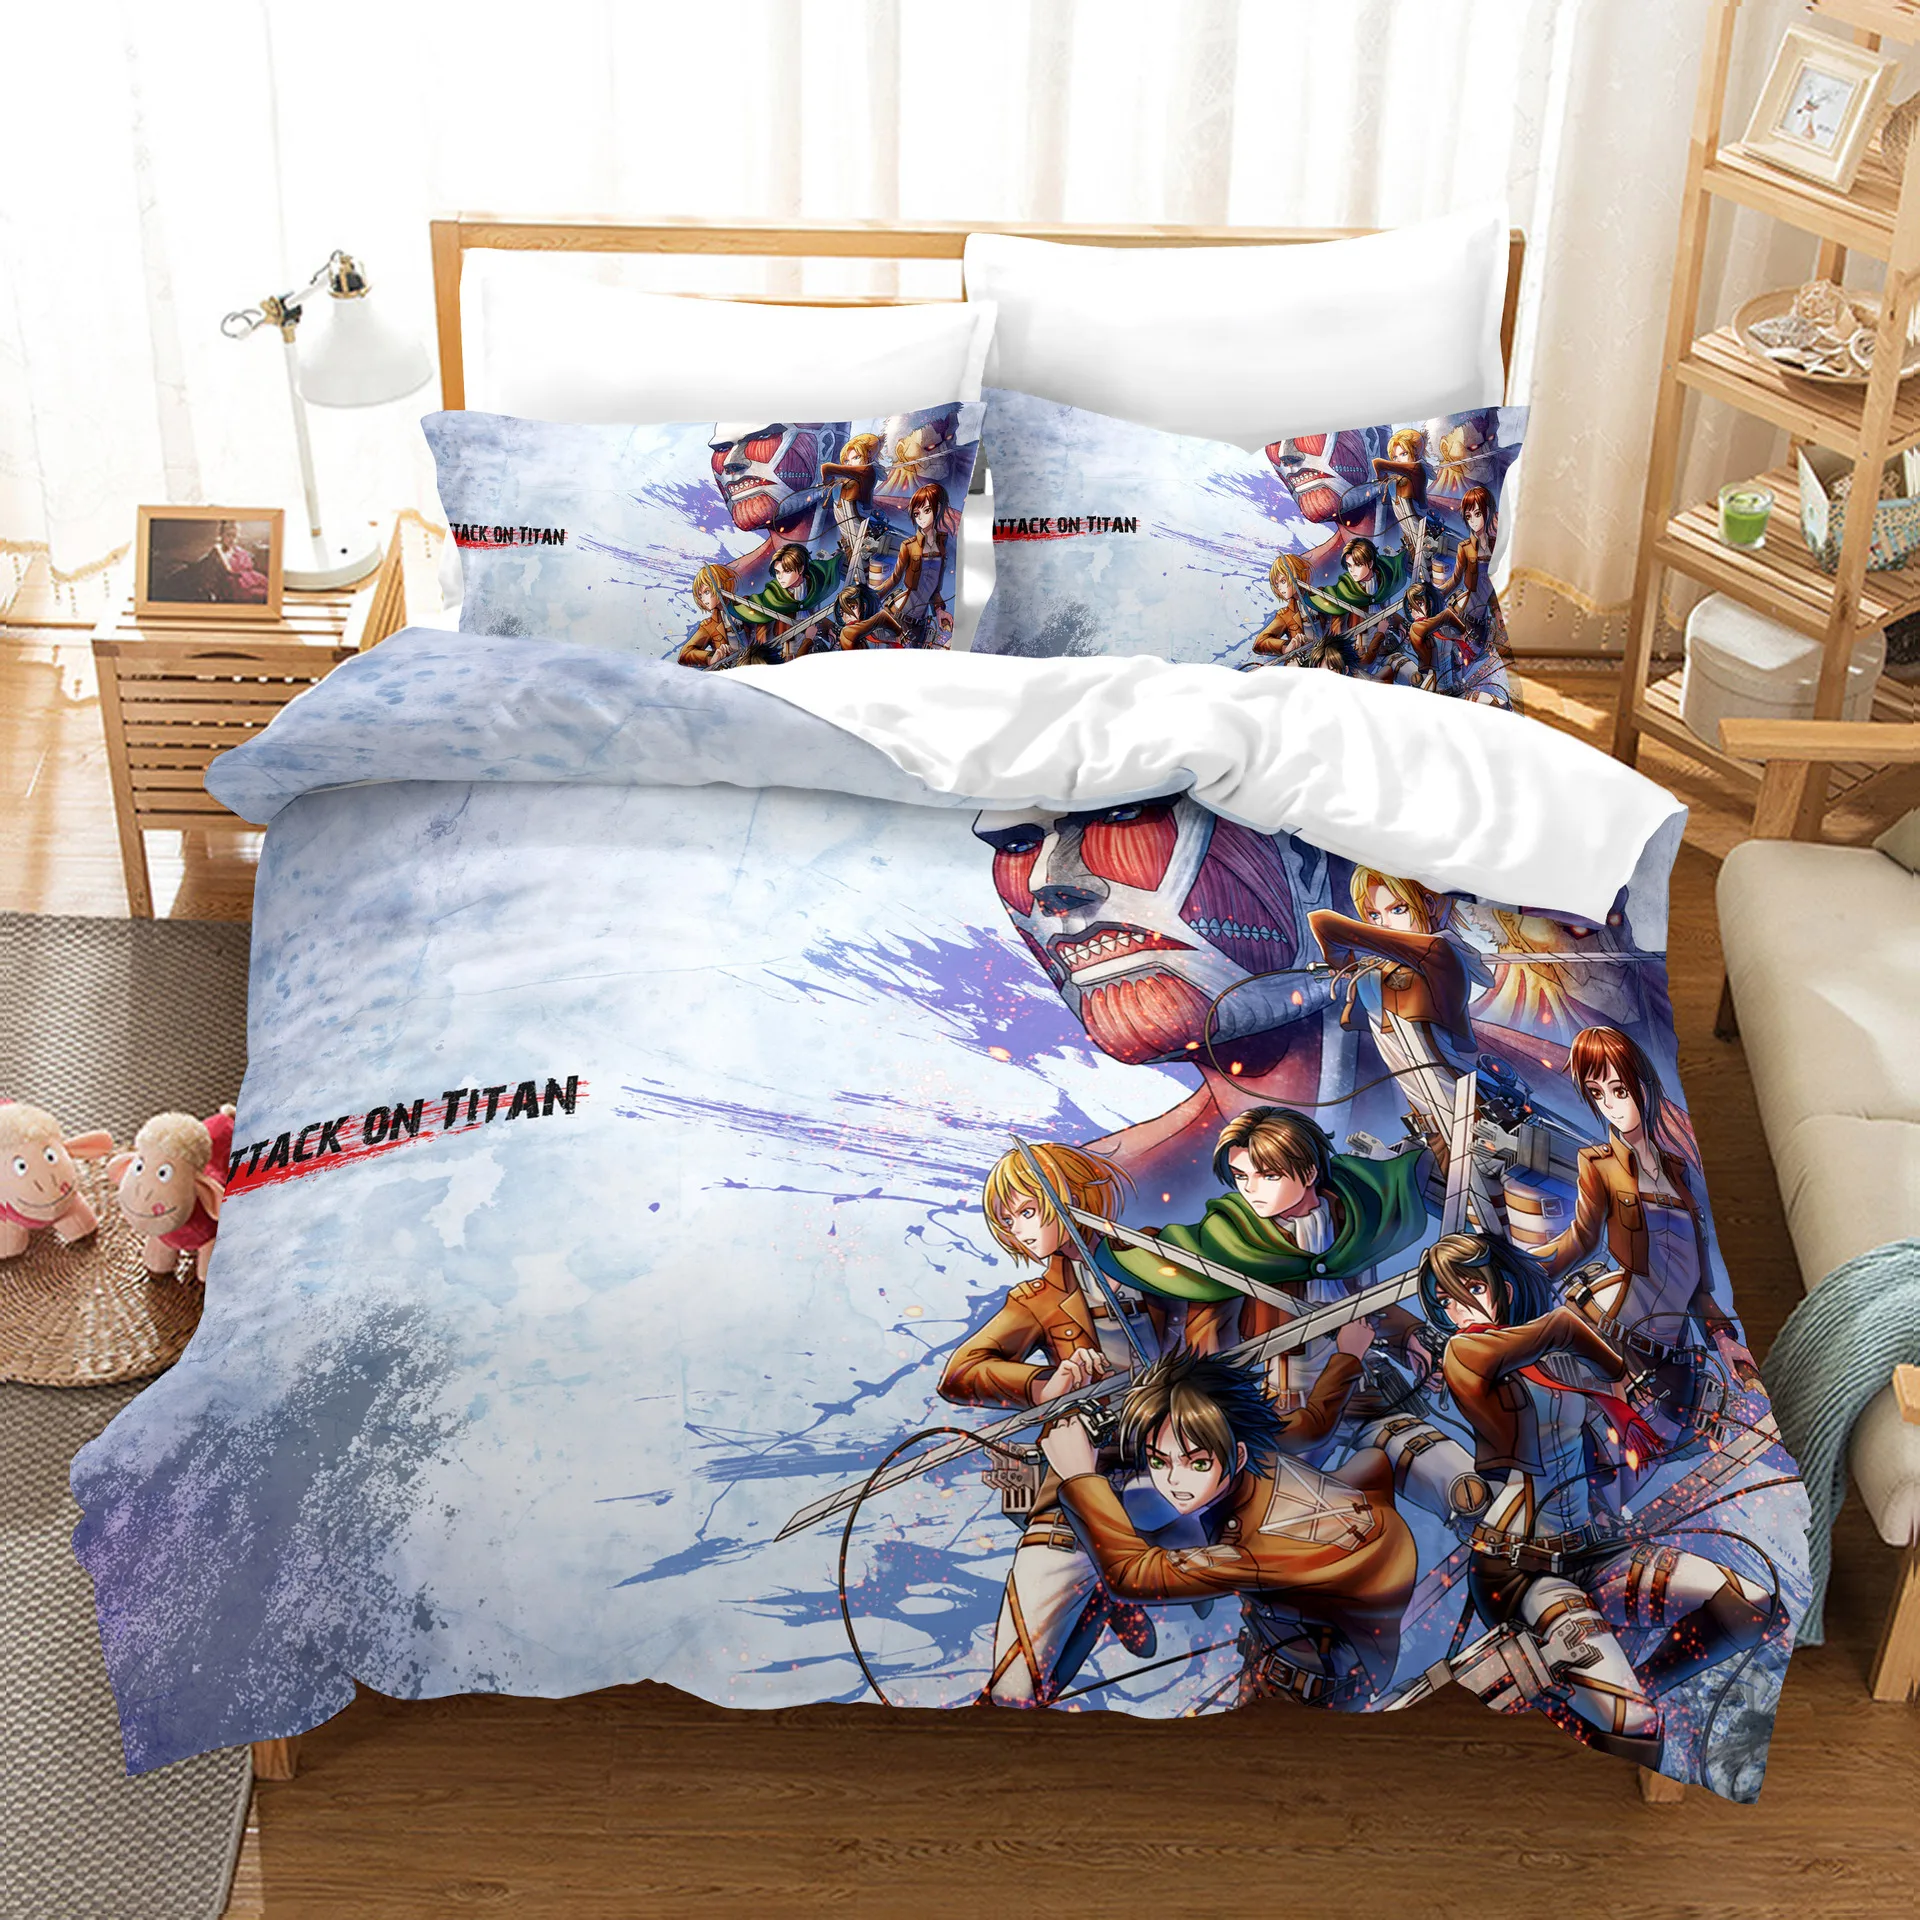 

Attack On Titan Duvet Cover Cartoon Bedding Sets Xmas Gift Bed Set 2/3 Pcs Quilt Comforter Covers Home Textiles US/Europe/UK Siz